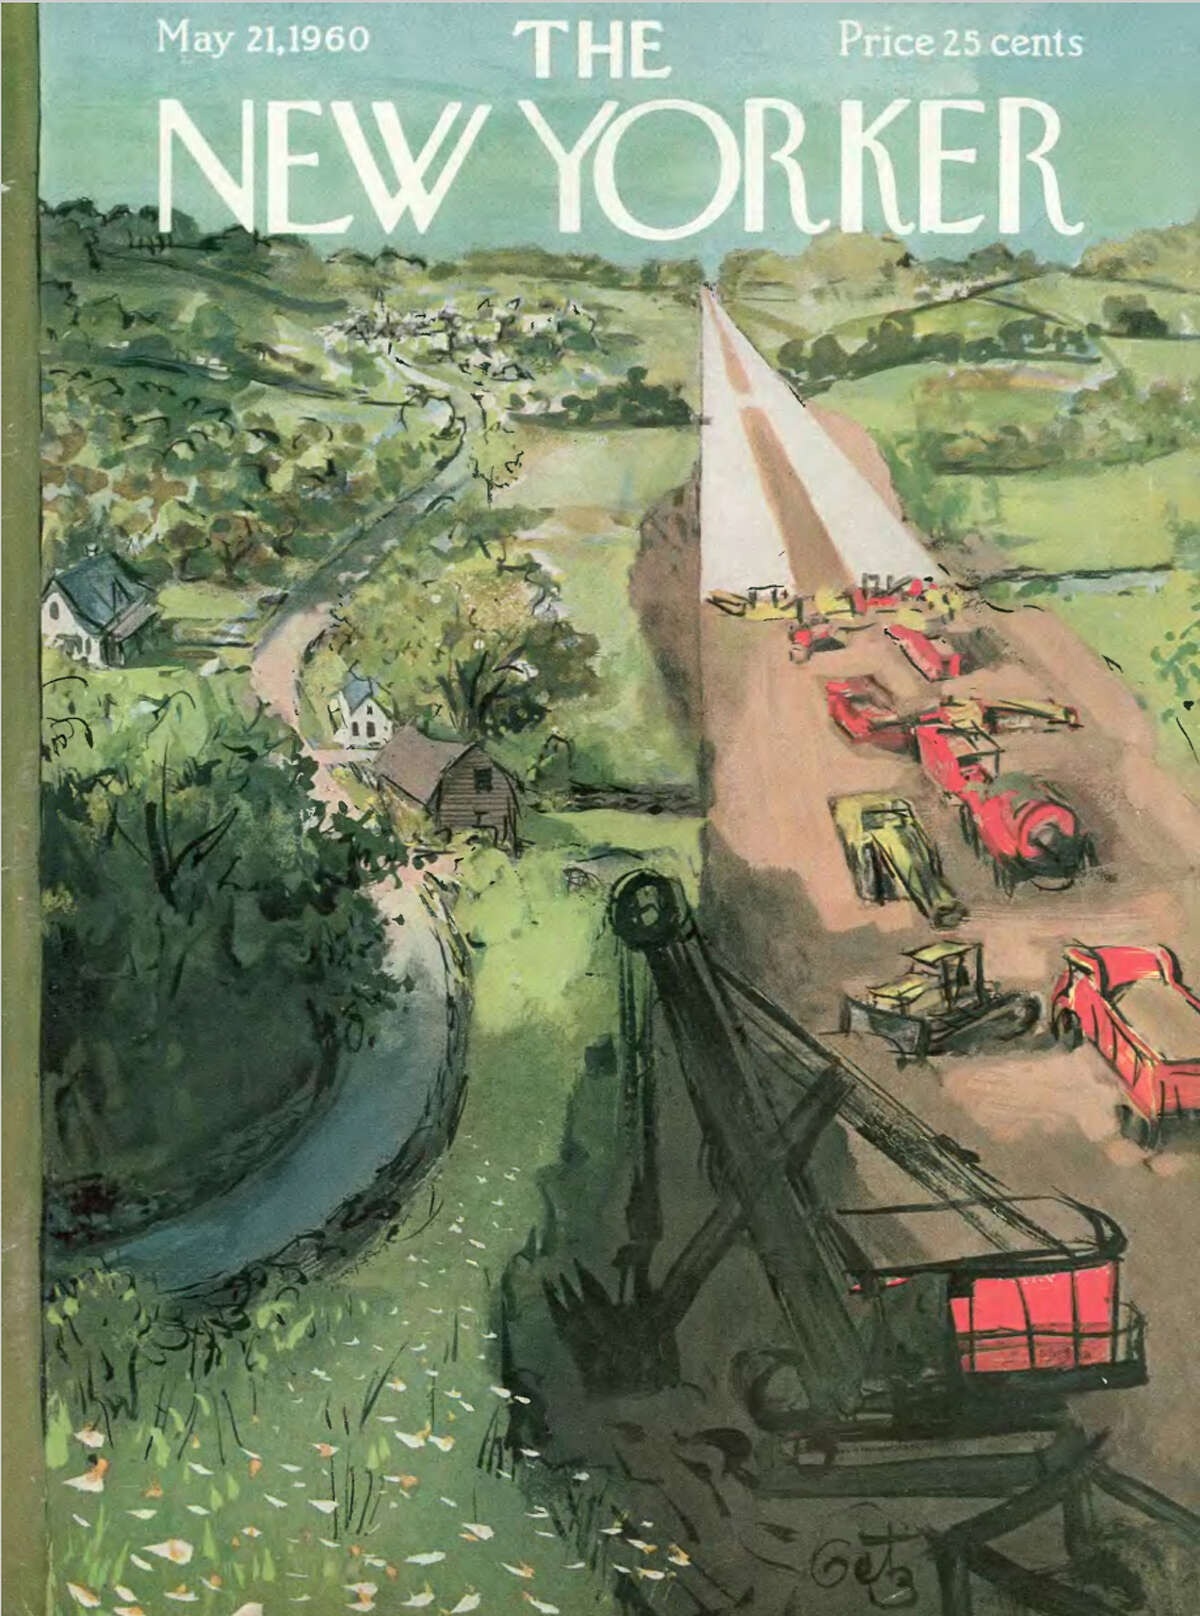 Above is a New Yorker cover by Arthur Getz from May 1960 of construction of Interstate 95 in the Westport area. The exhibit of magazine covers at the Westport Historical Society has been extended through July 5.